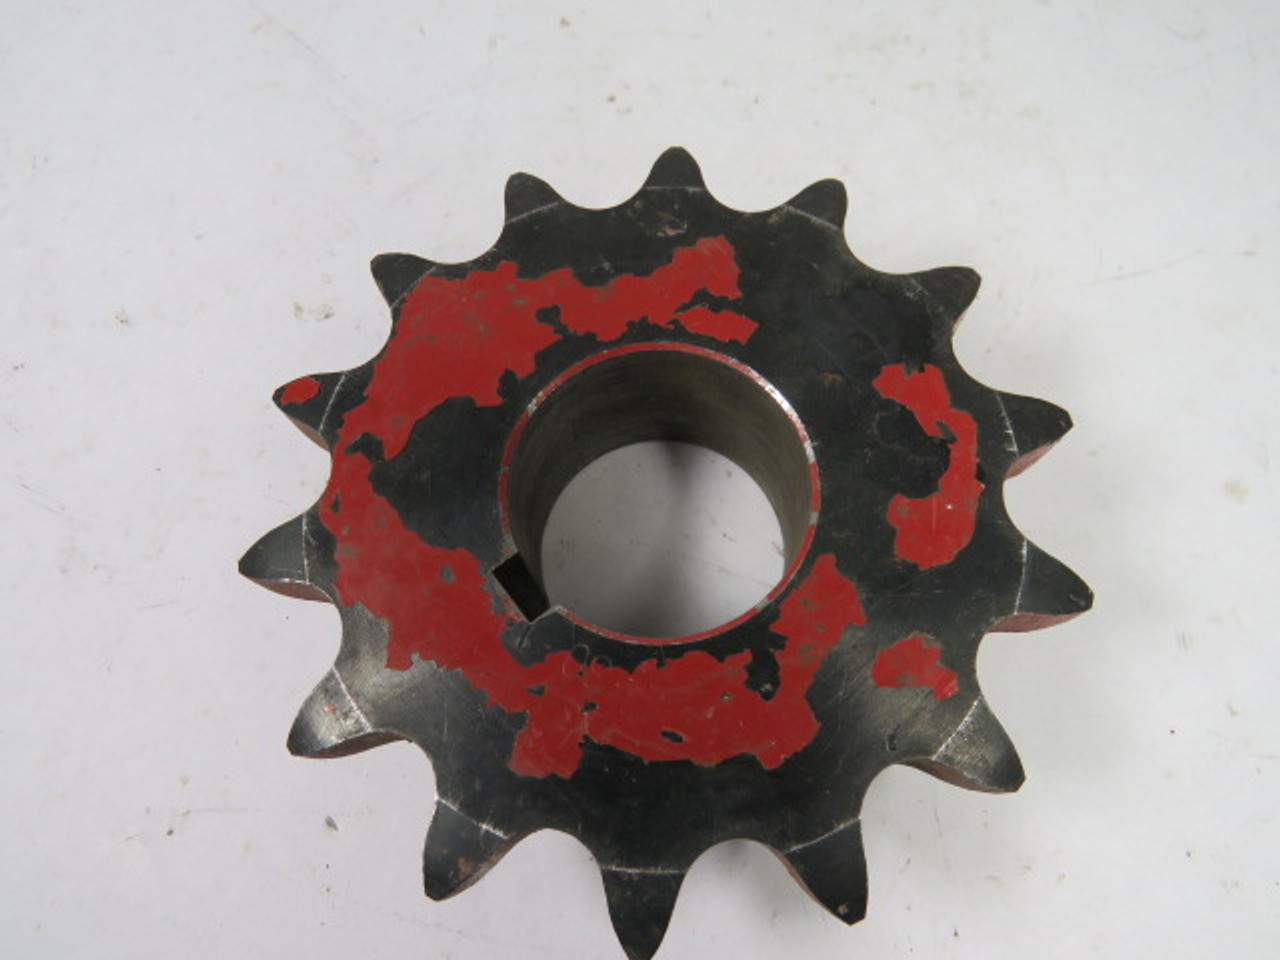 Generic H80-14-1-3/4 Roller Chain Sprocket 1-3/4" ID 14T 80C 3-1/4" OD USED